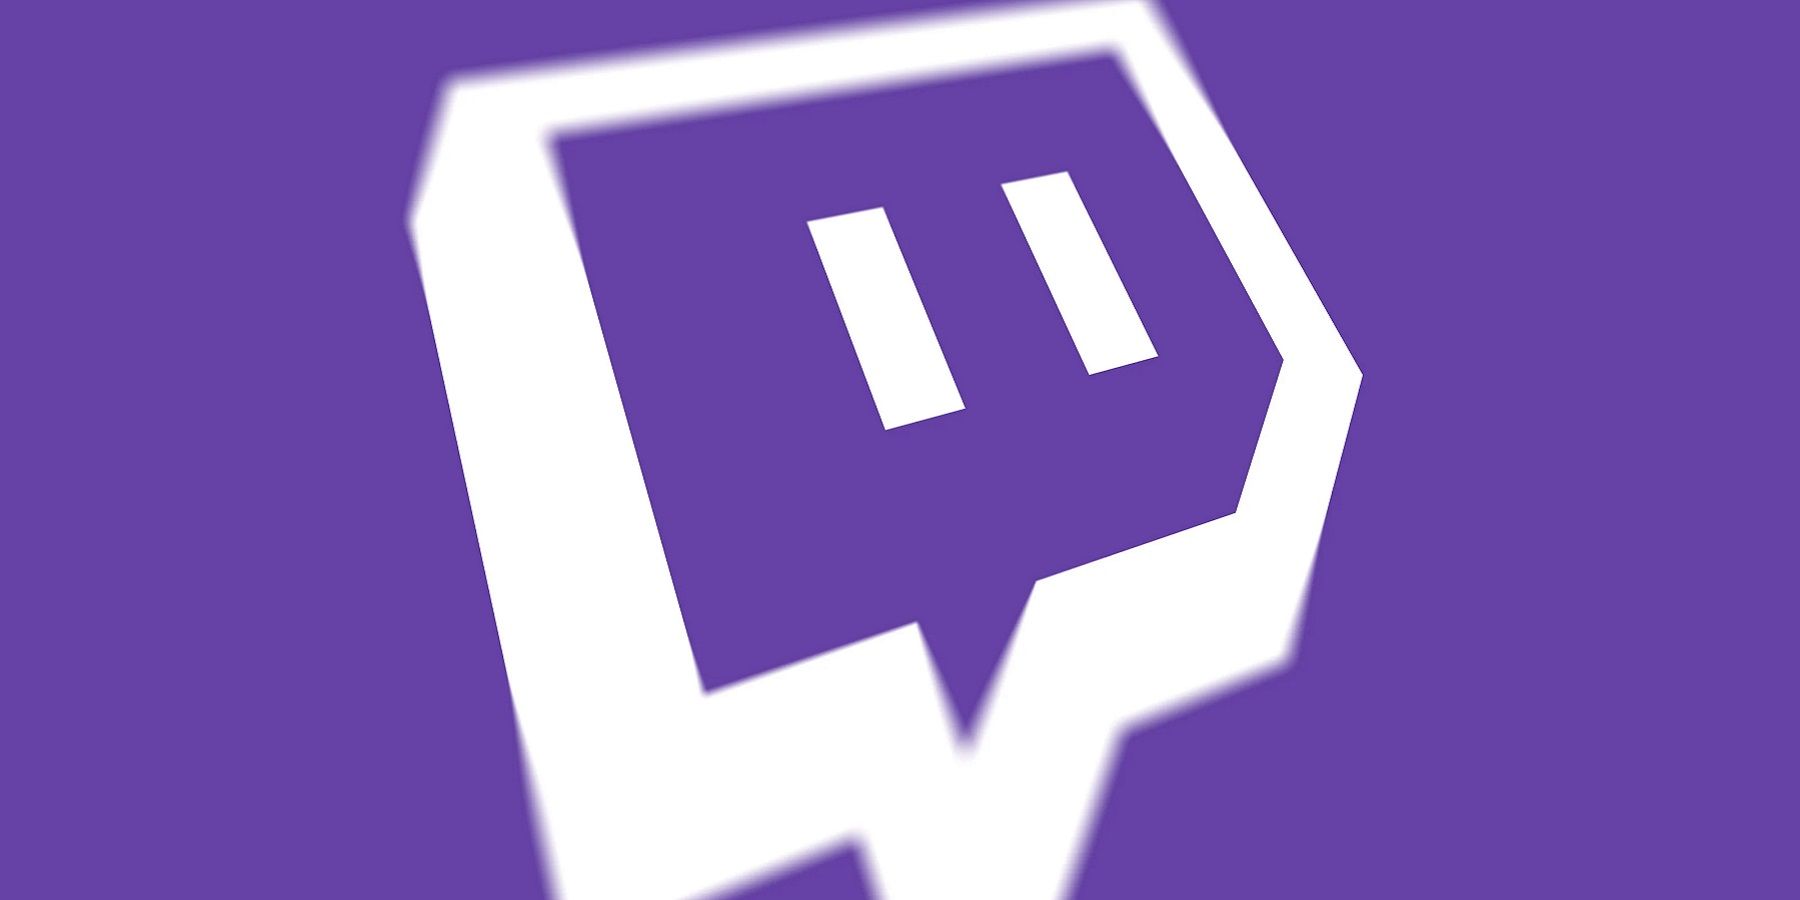 Image of Twitch logo on a purple background.